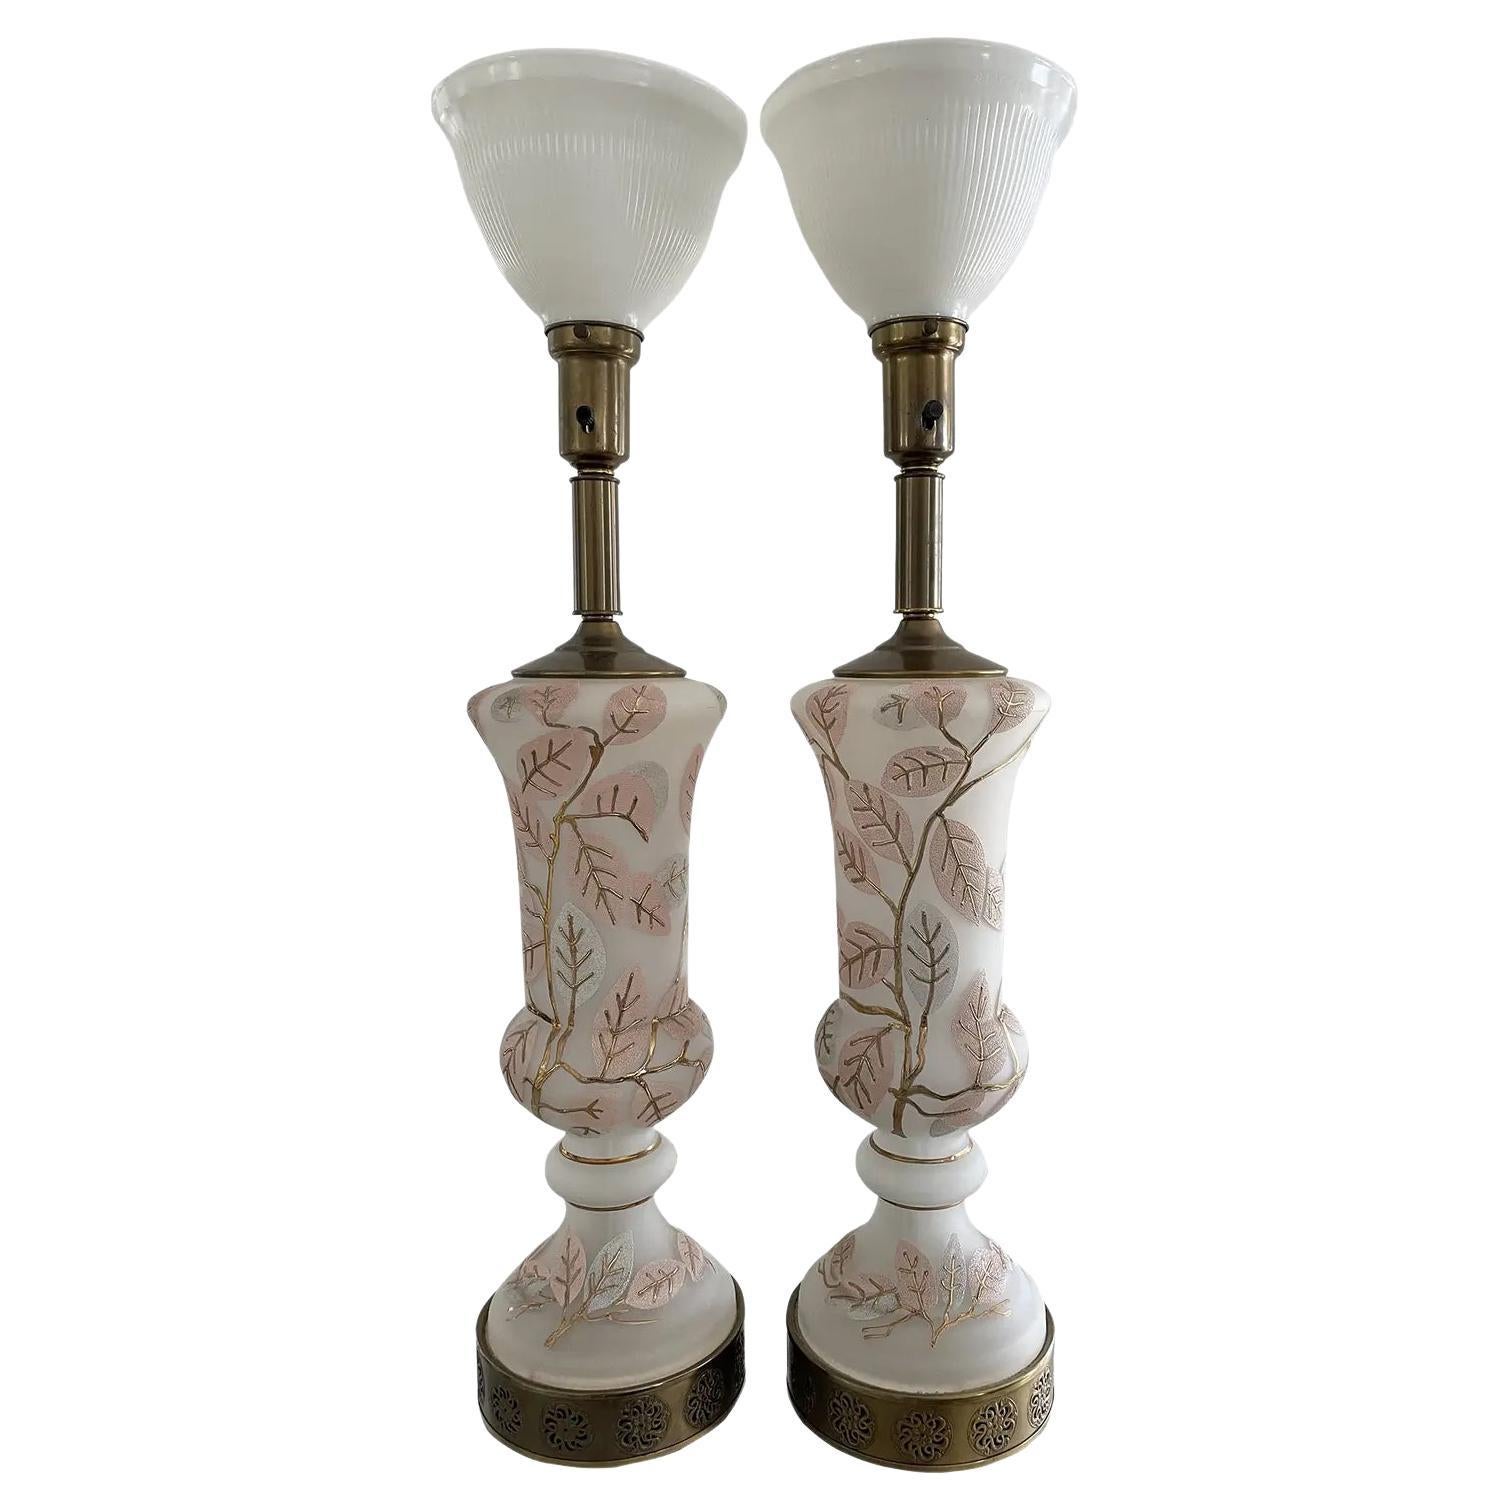  Hollywood Regency Urn Lamps - a Pair For Sale